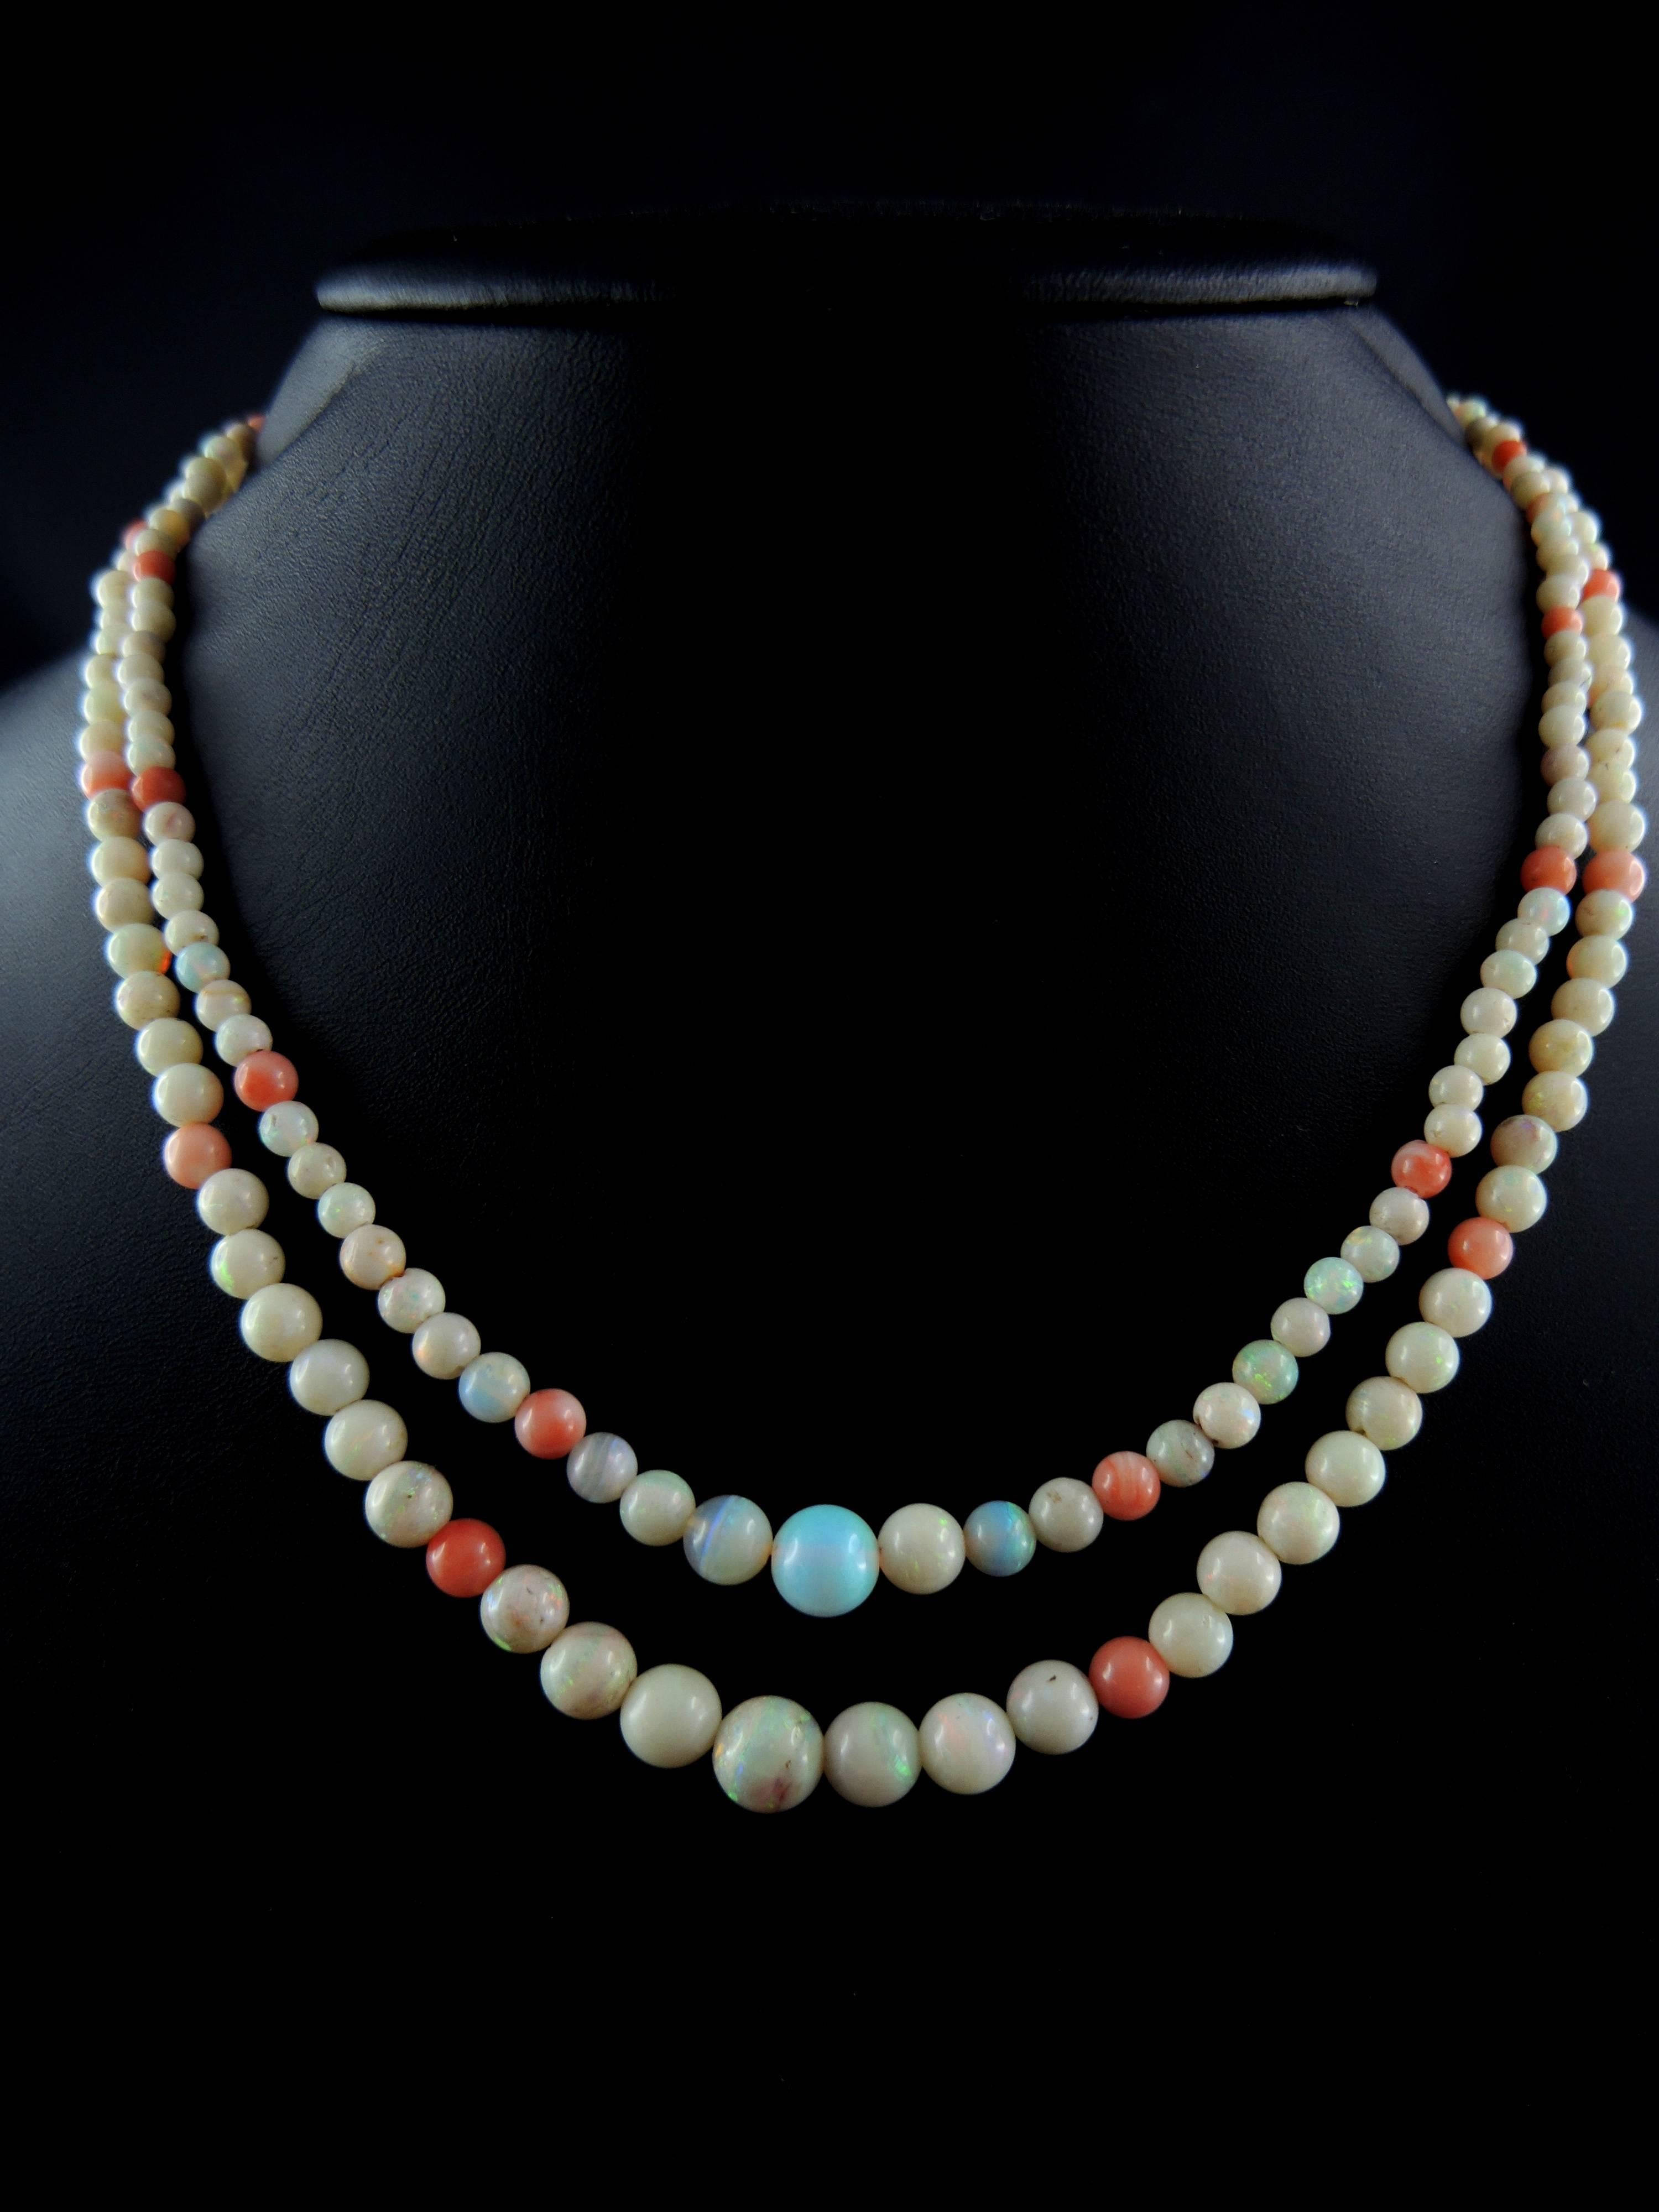 Antique Art Deco necklace set with two ranks of opal and coral pearls.

Clasp and safety chaine made of silver.

Circa 1930

weight: 19,40g
Length of the ranks: 44.00 cm and 41.50 cm

State : good general state, opal with more or less intense play